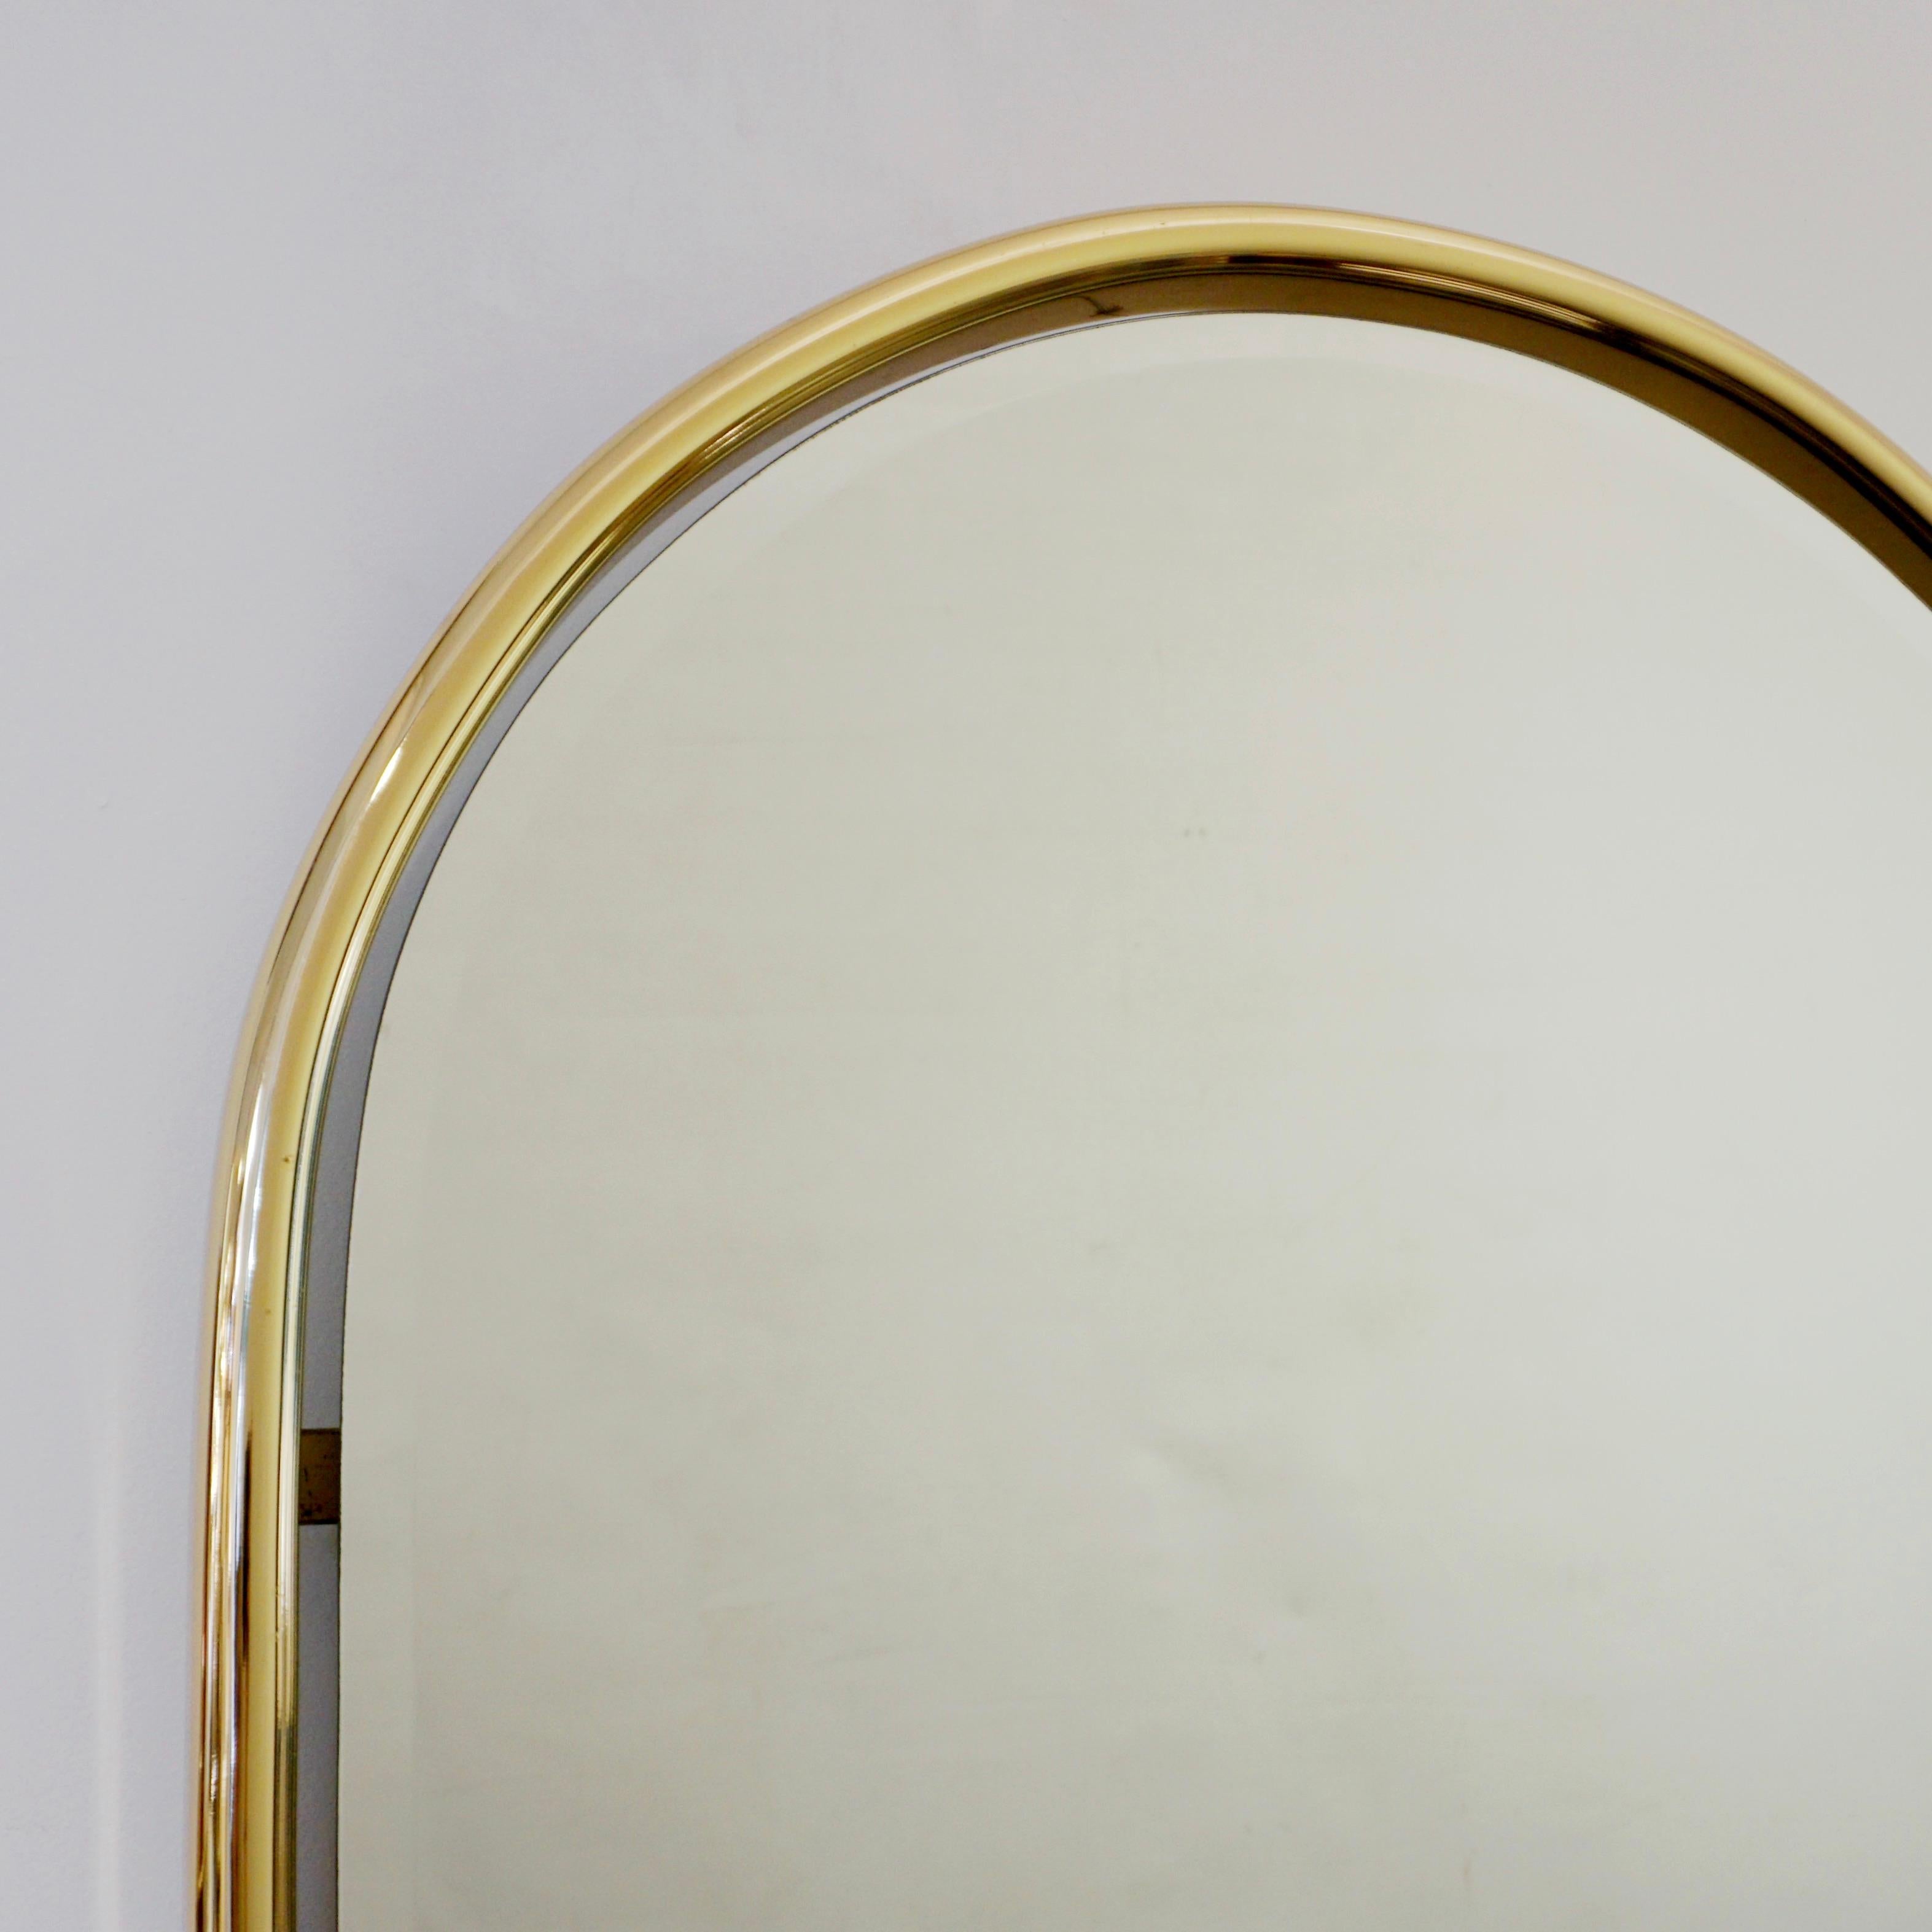 Mid-Century Modern 1960s Italian Minimalist Brass Floating Mirror with Round Arched Top Frame For Sale